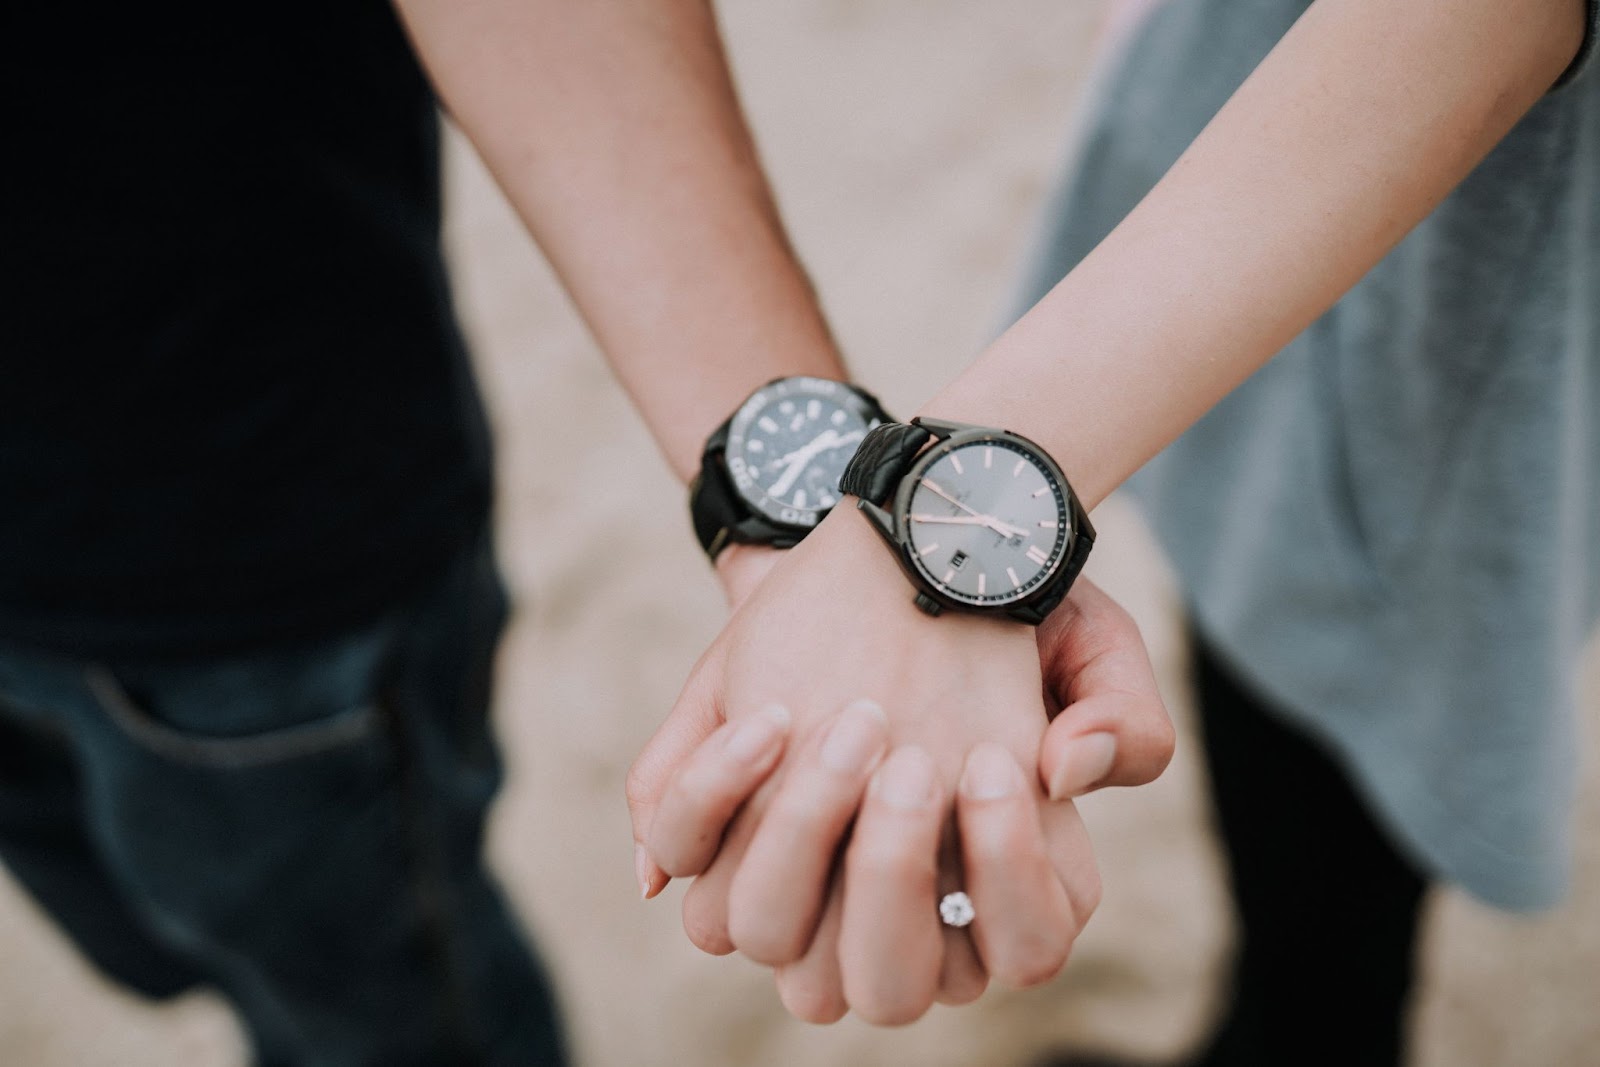 An engaged couple holding hands with dark toned watches on each of their wrists